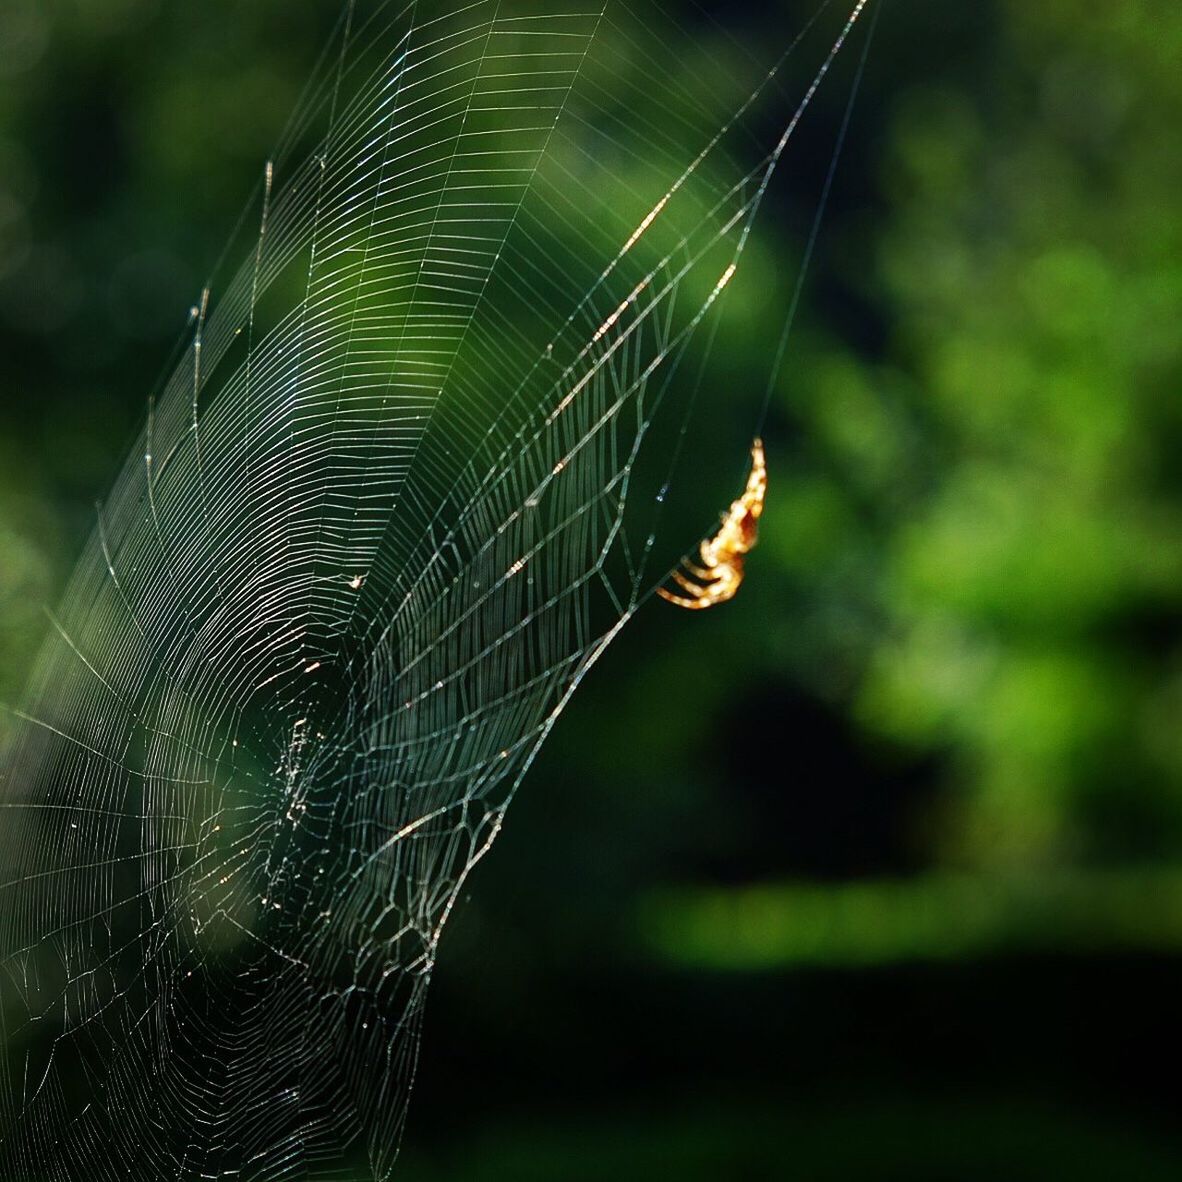 CLOSE-UP OF SPIDER WEB AGAINST BLURRED BACKGROUND